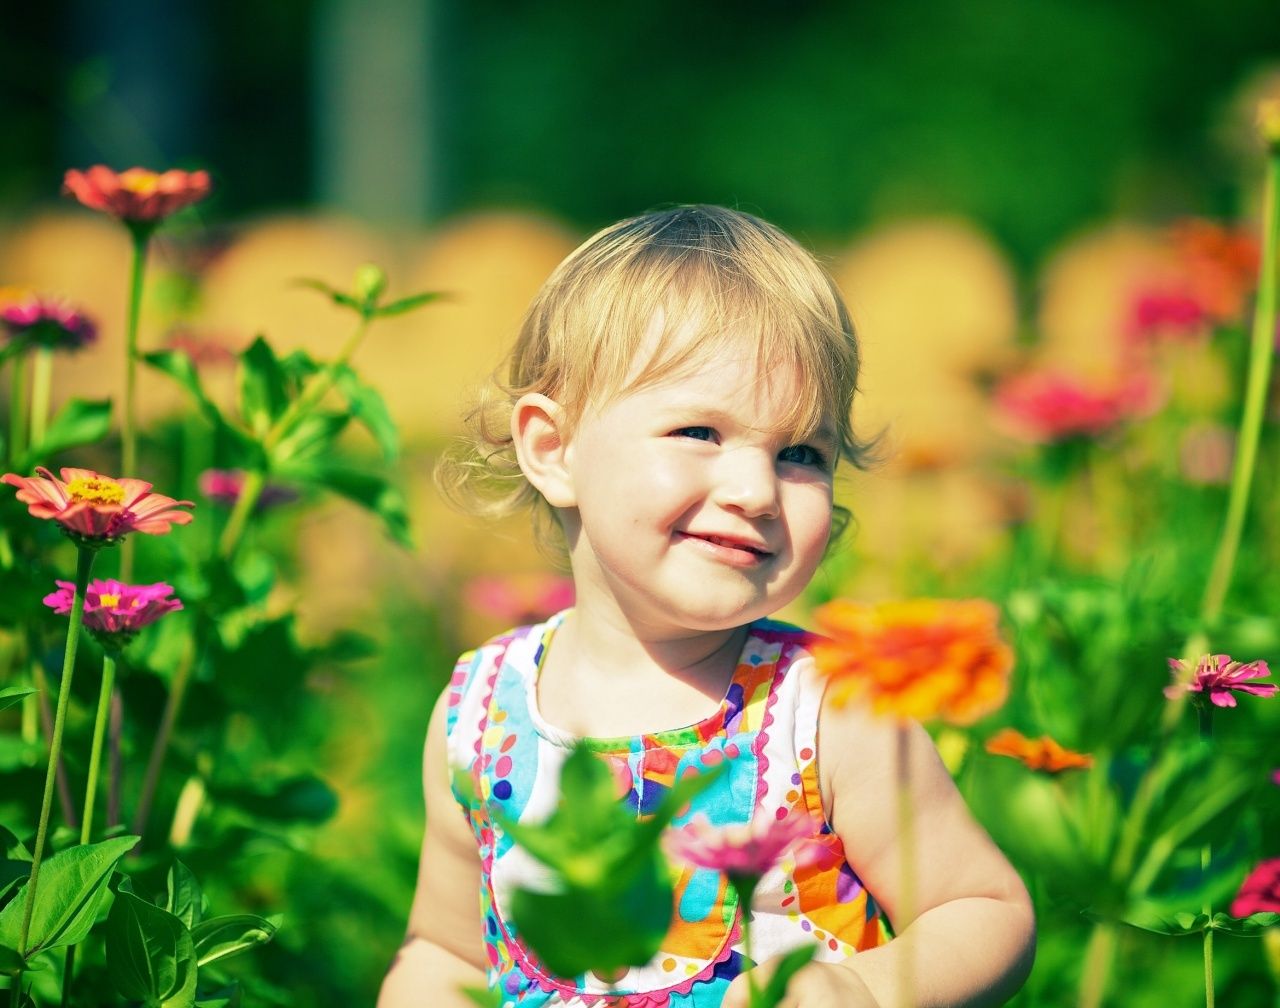 cute baby hd free download wallpaper | Only hd wallpapers